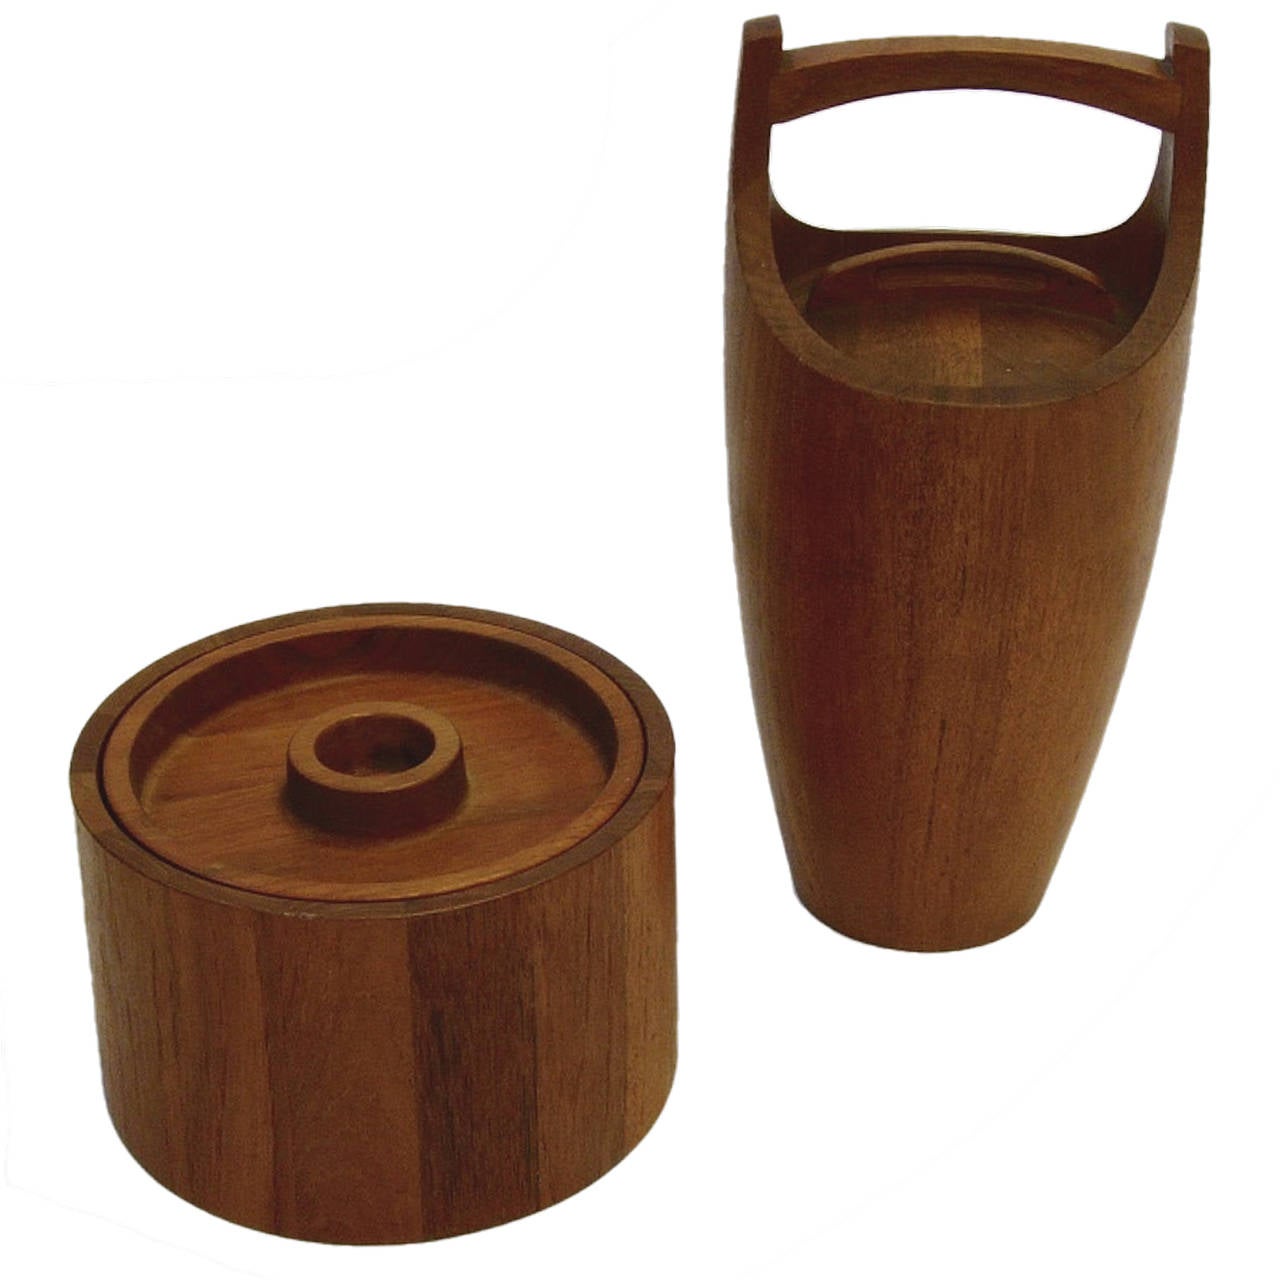 Pair of lined teak ice buckets made by Dansk and designed by Jens Quistgaard. 
Tall  measures:  15.25"tall  x 7" round
Shorter measures:  6" tall  x  9" round